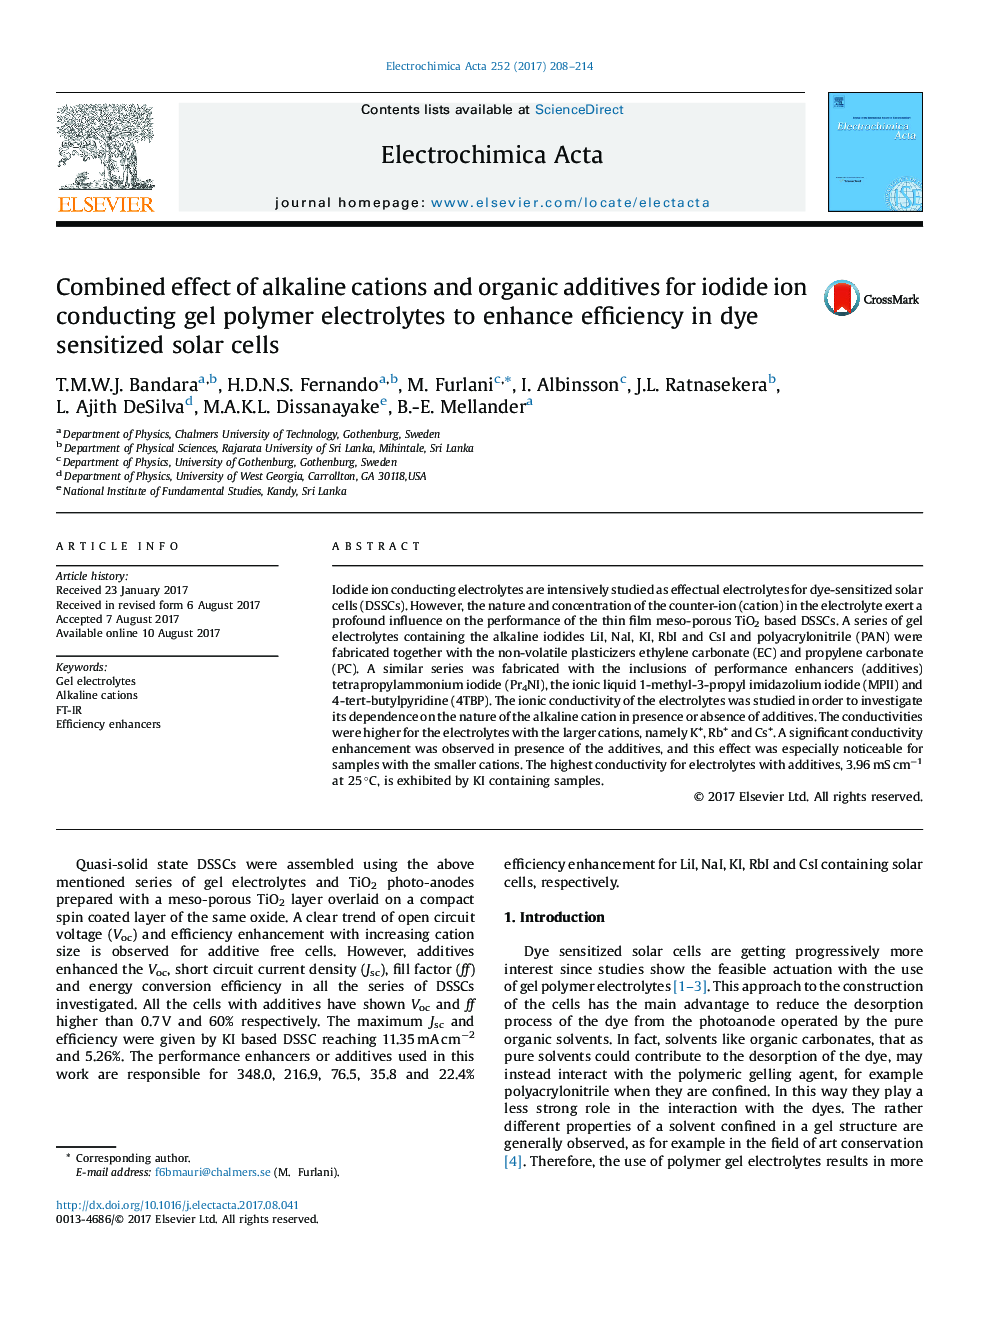 Combined effect of alkaline cations and organic additives for iodide ion conducting gel polymer electrolytes to enhance efficiency in dye sensitized solar cells